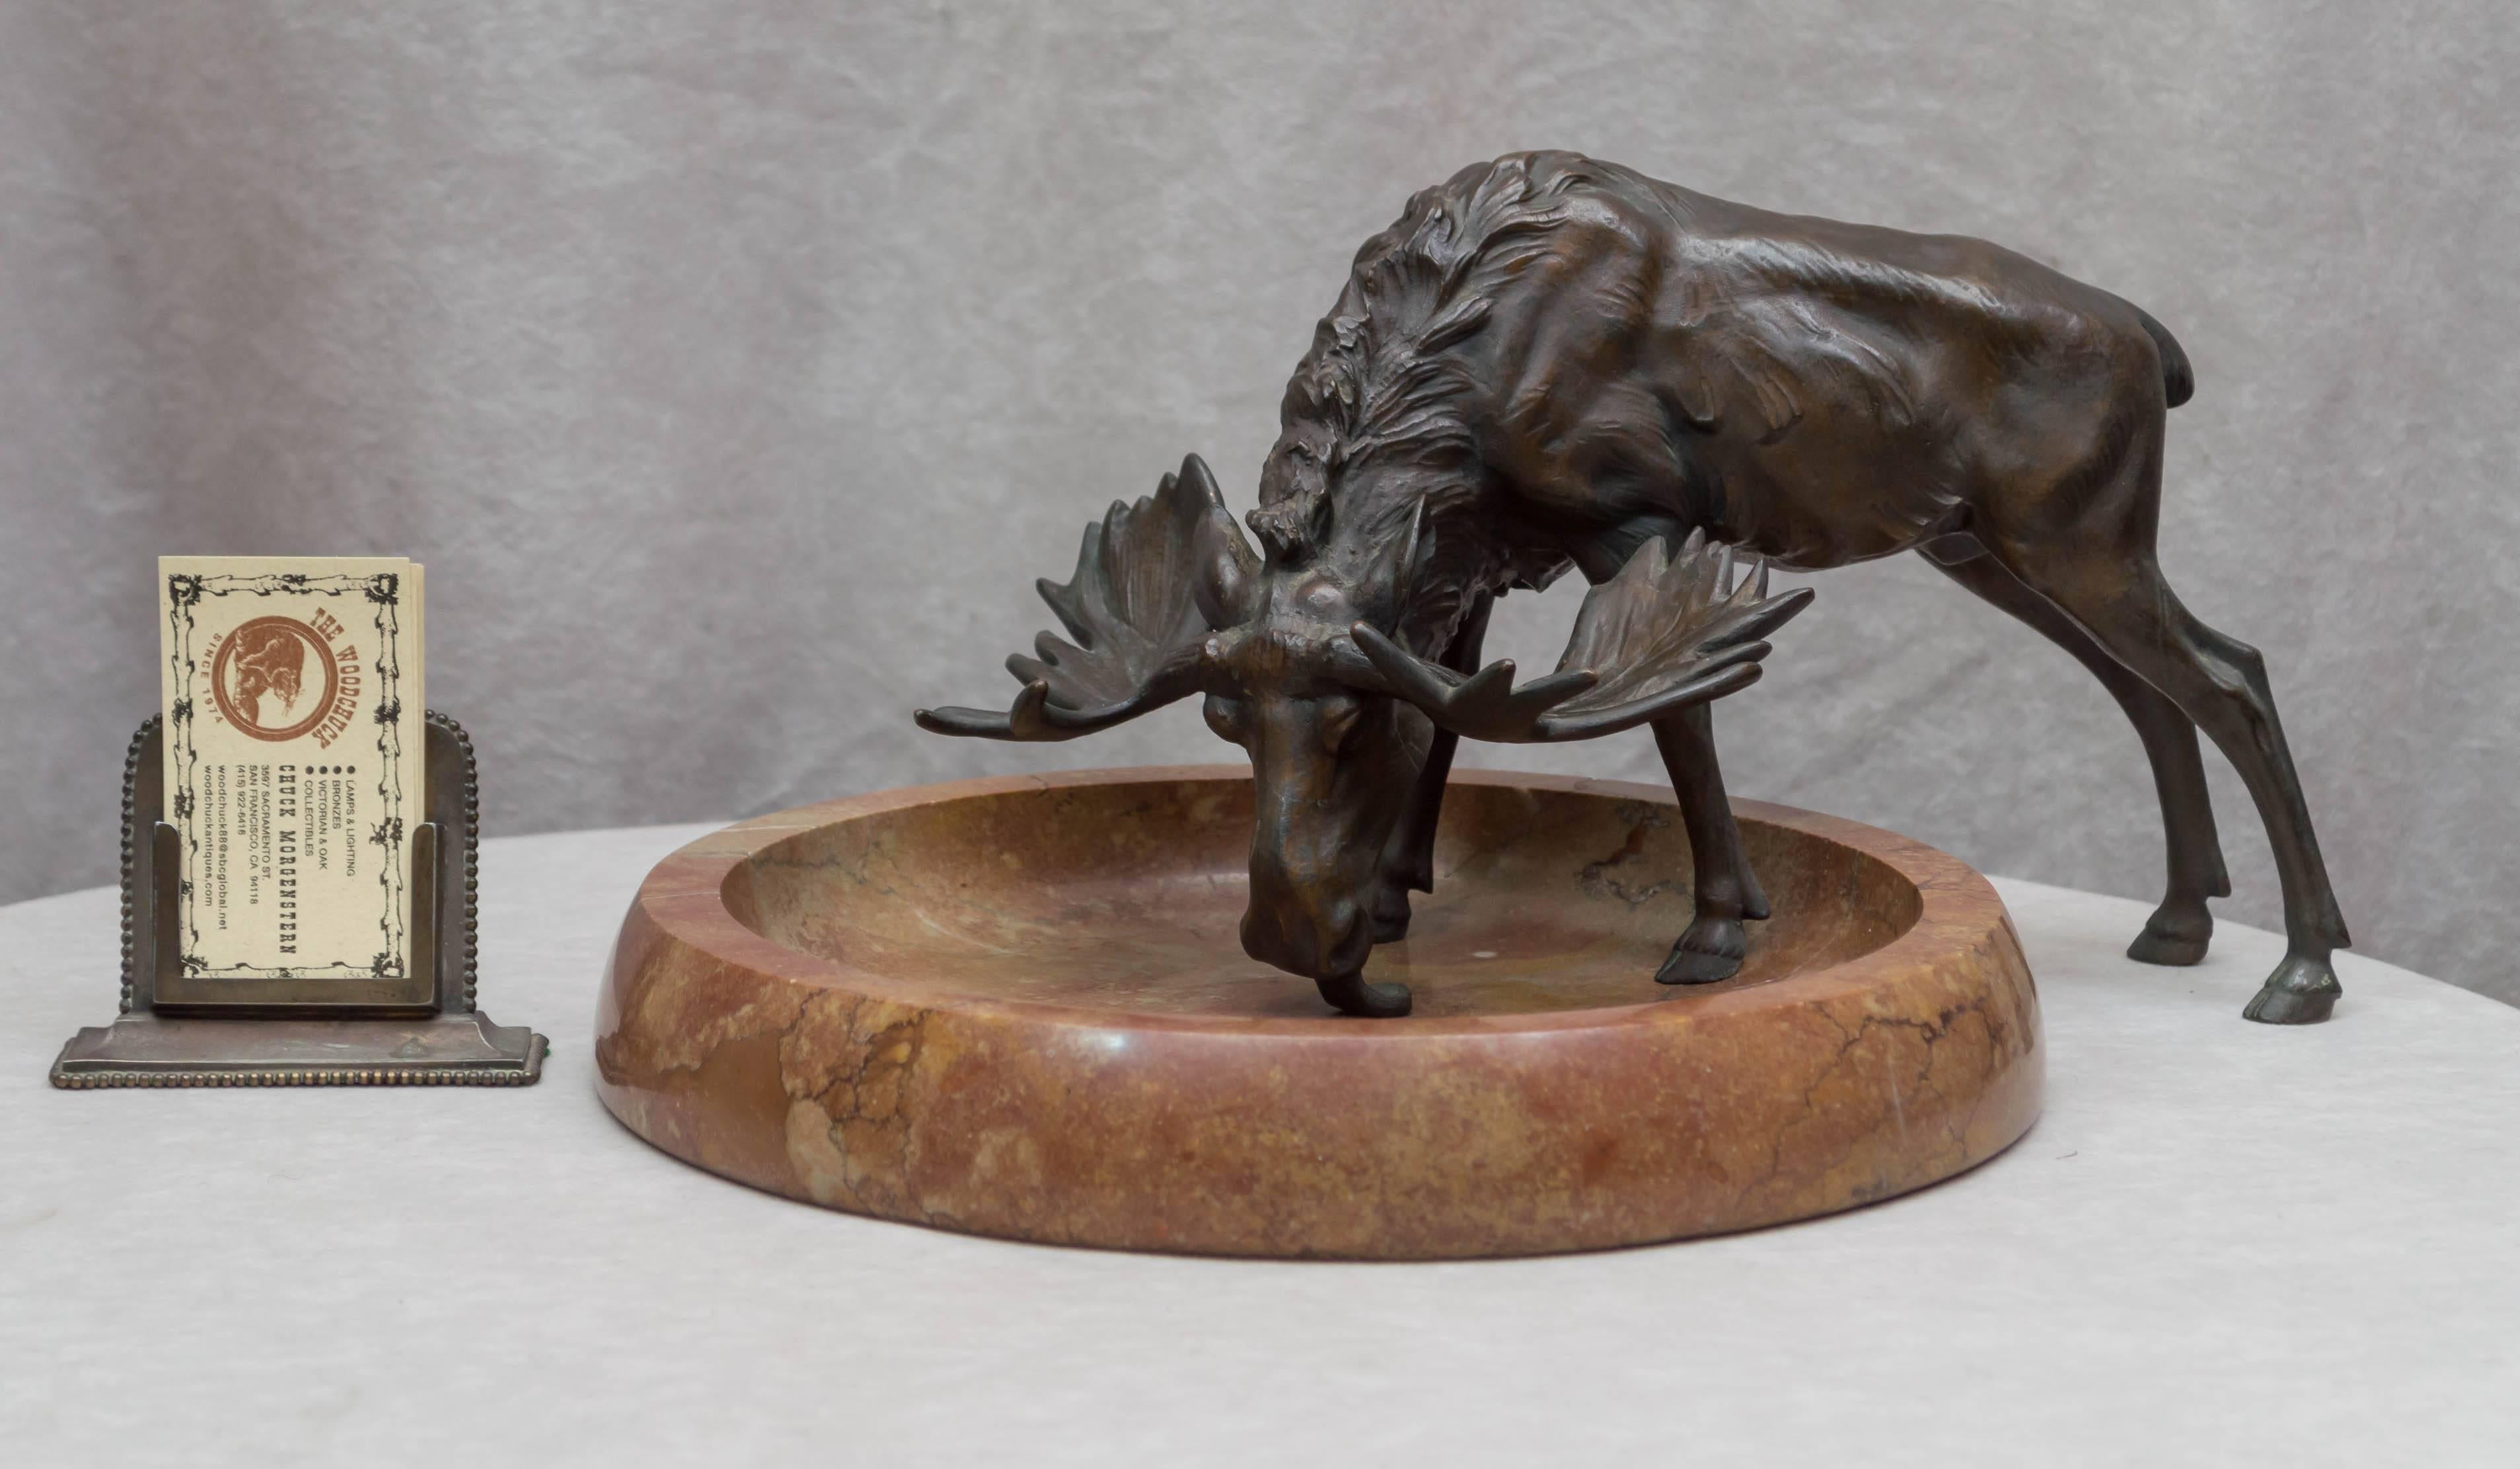 This whimsical and detailed bronze figure of a moose is a joy to behold. With the moose standing outside the marble dish, and licking the area, make this very special. His ponderous antlers just add to the enjoyment of this bronze. Marked 